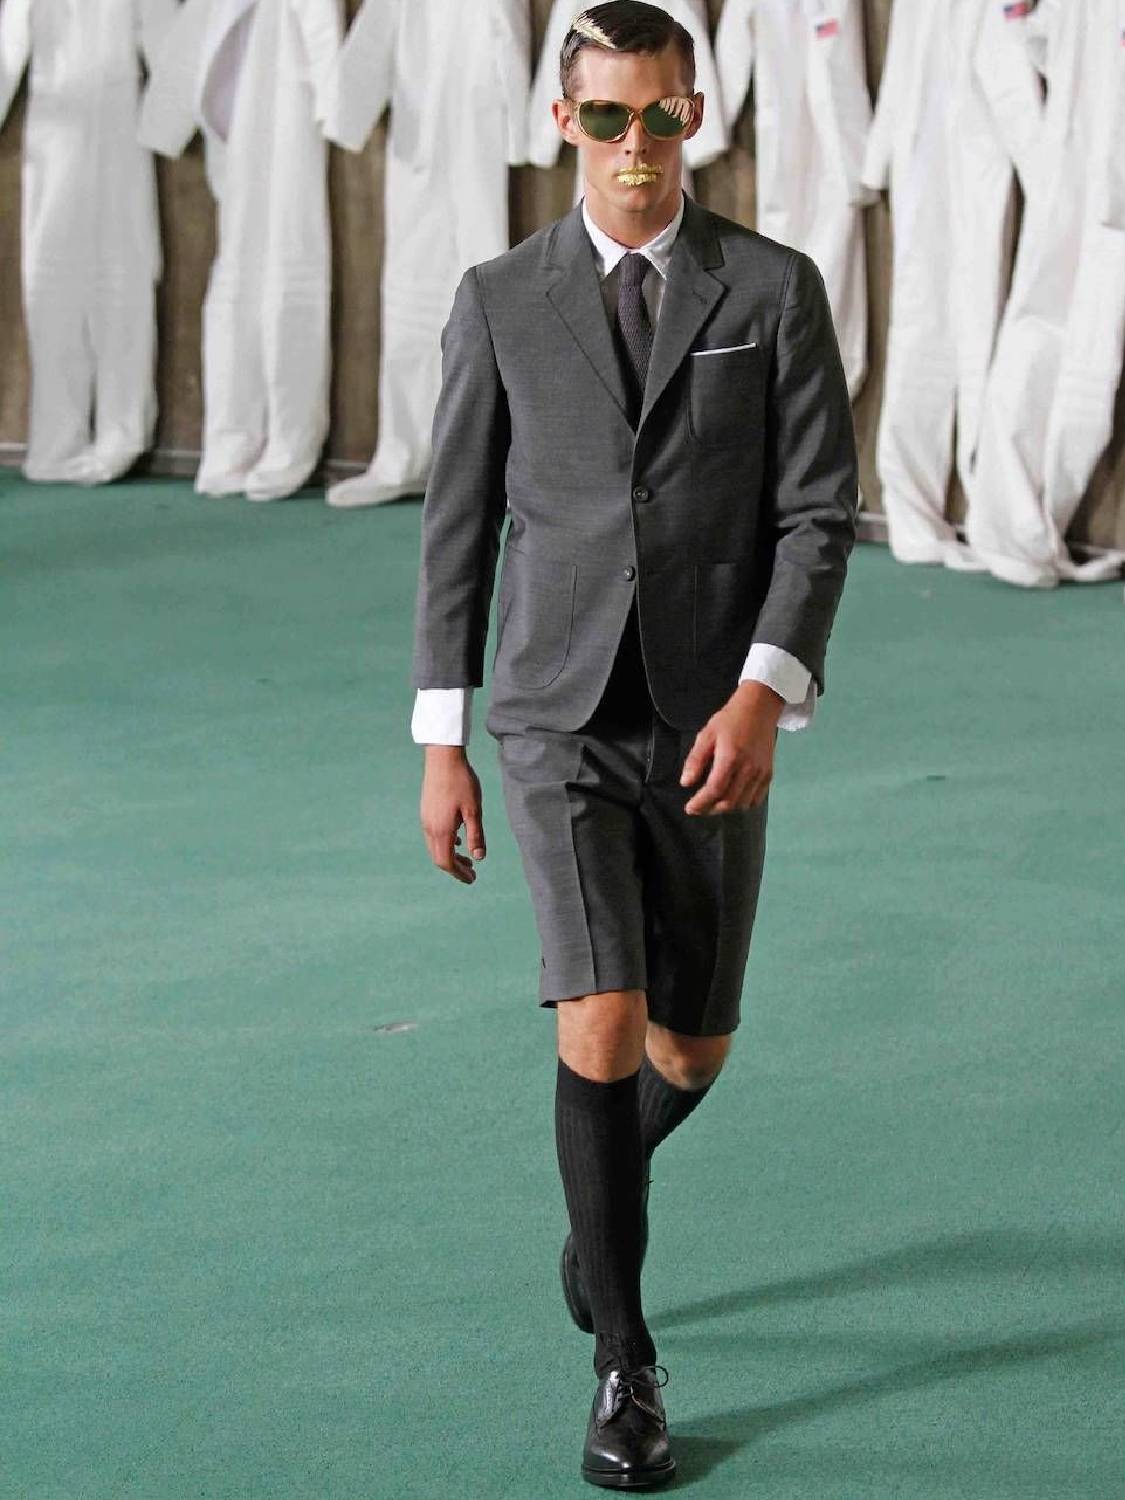 Fashion designer Thom Browne reimagined the suit — now he’s thinking ...